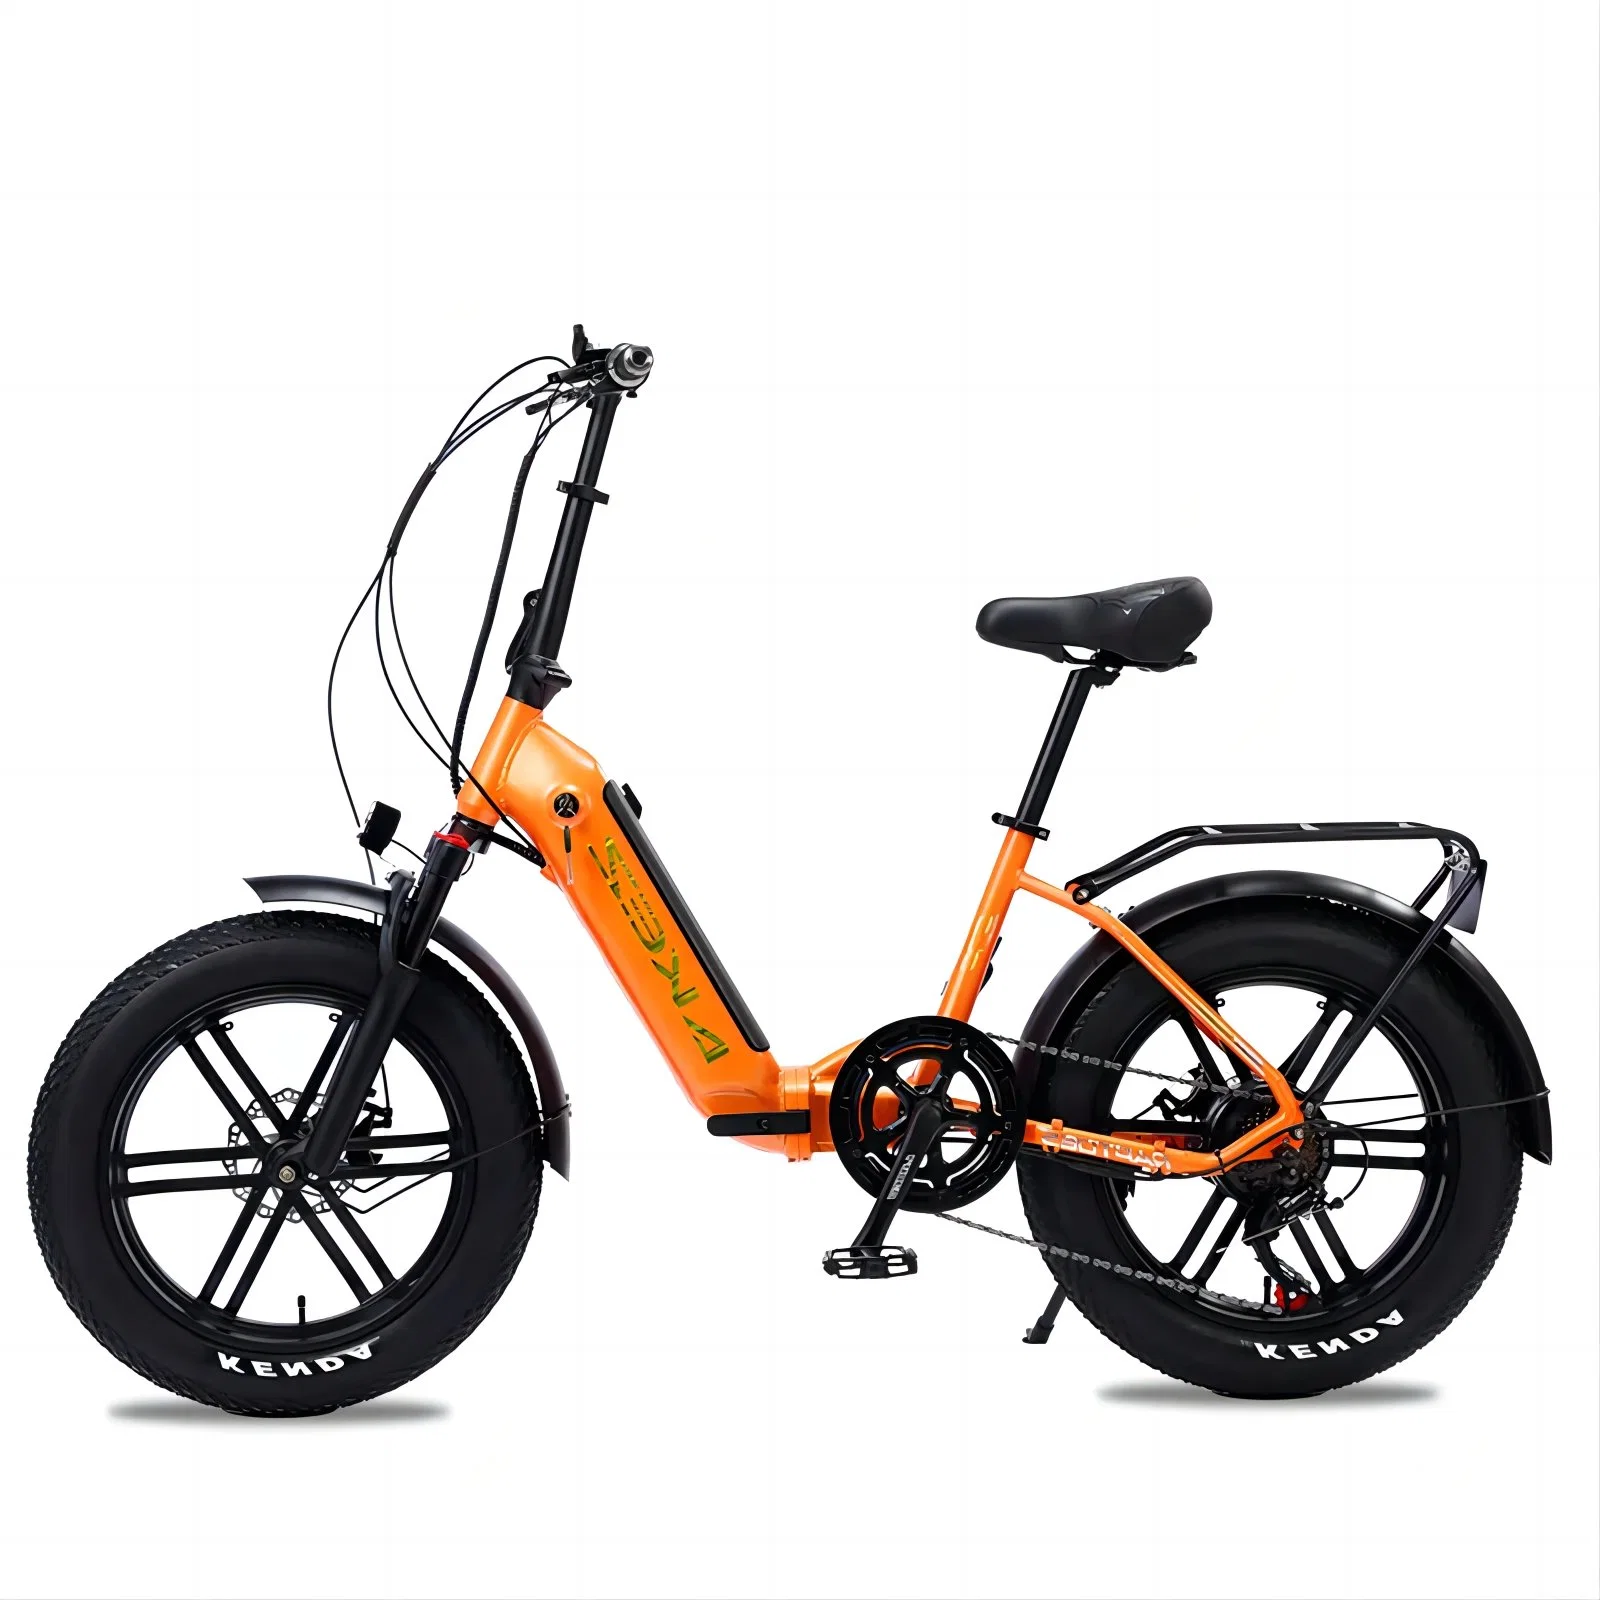 Super Strong Power 7 Speed Electric Mountain Bicycle for Men Electric Bike 500W Fast Electric Bike